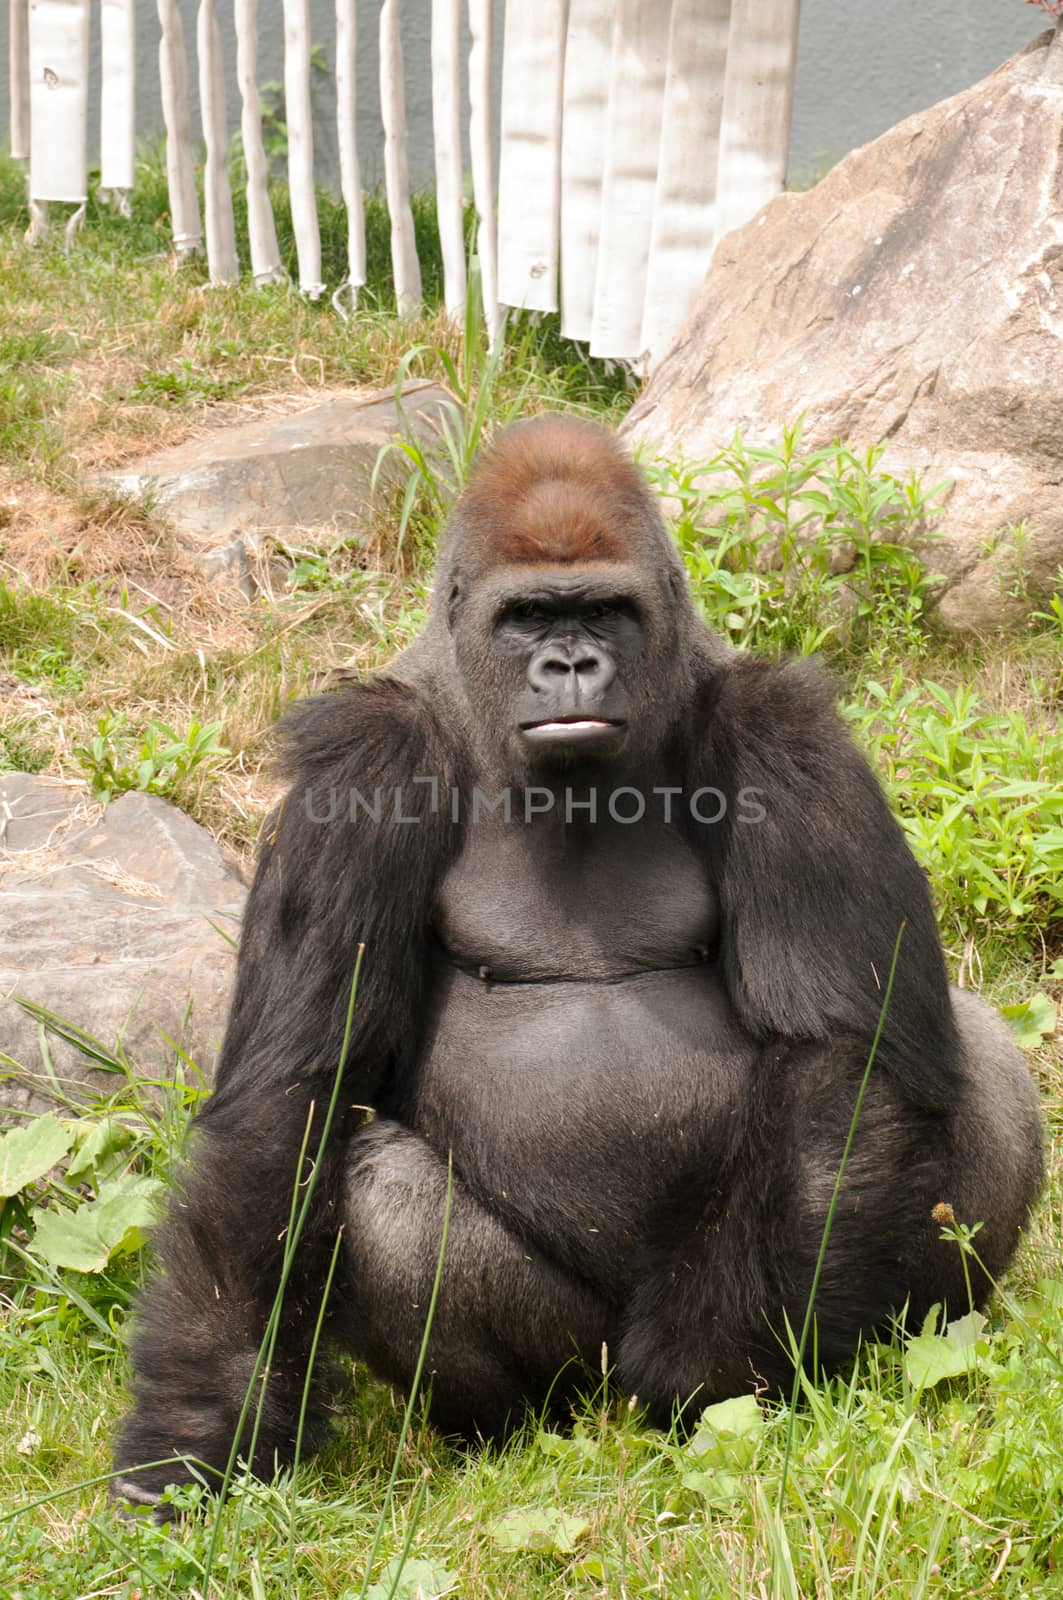 Large gorilla looking straight at the camera